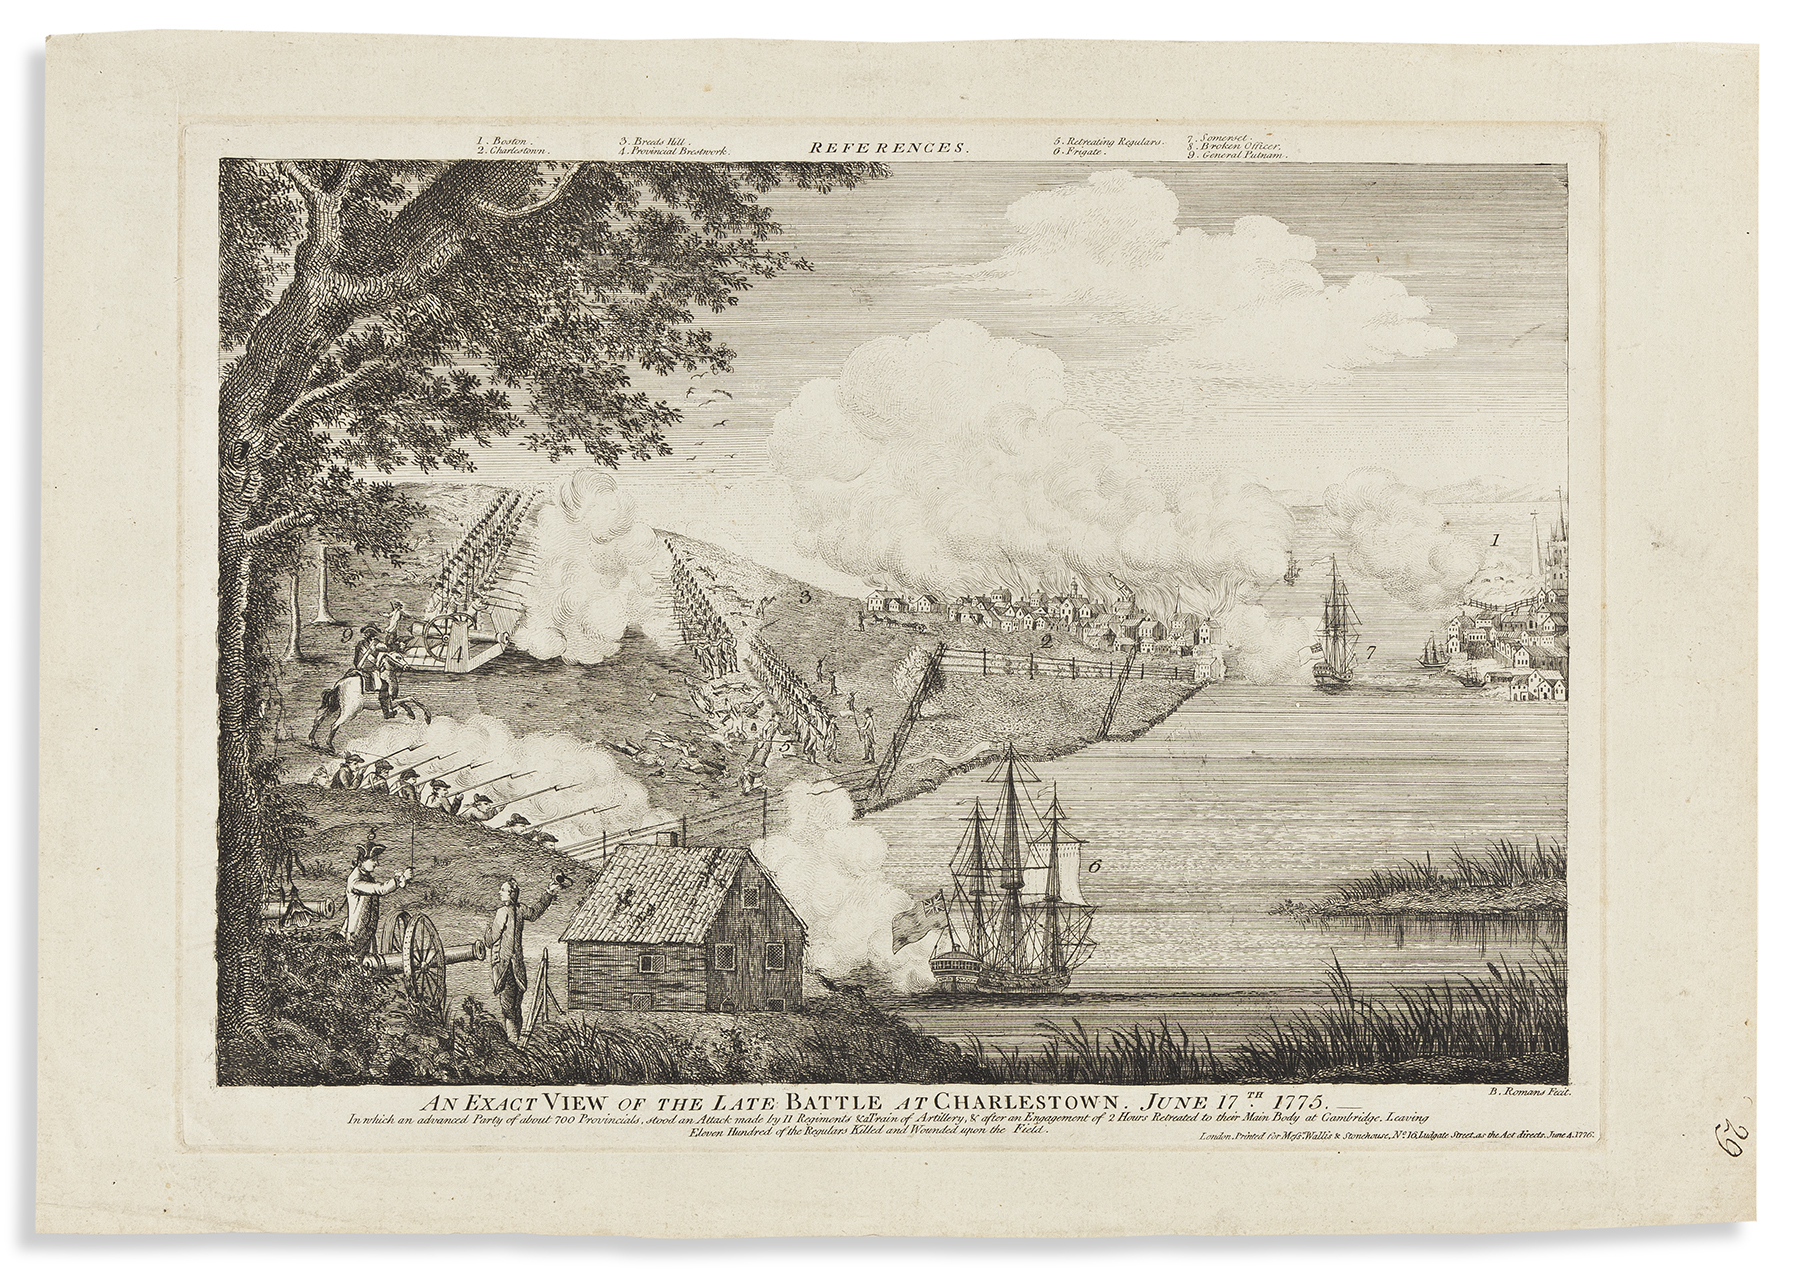 A 1776 engraving of the Late Battle at Charlestown on June 17, 1775, by Bernard Romans, estimated at $40,000-$60,000